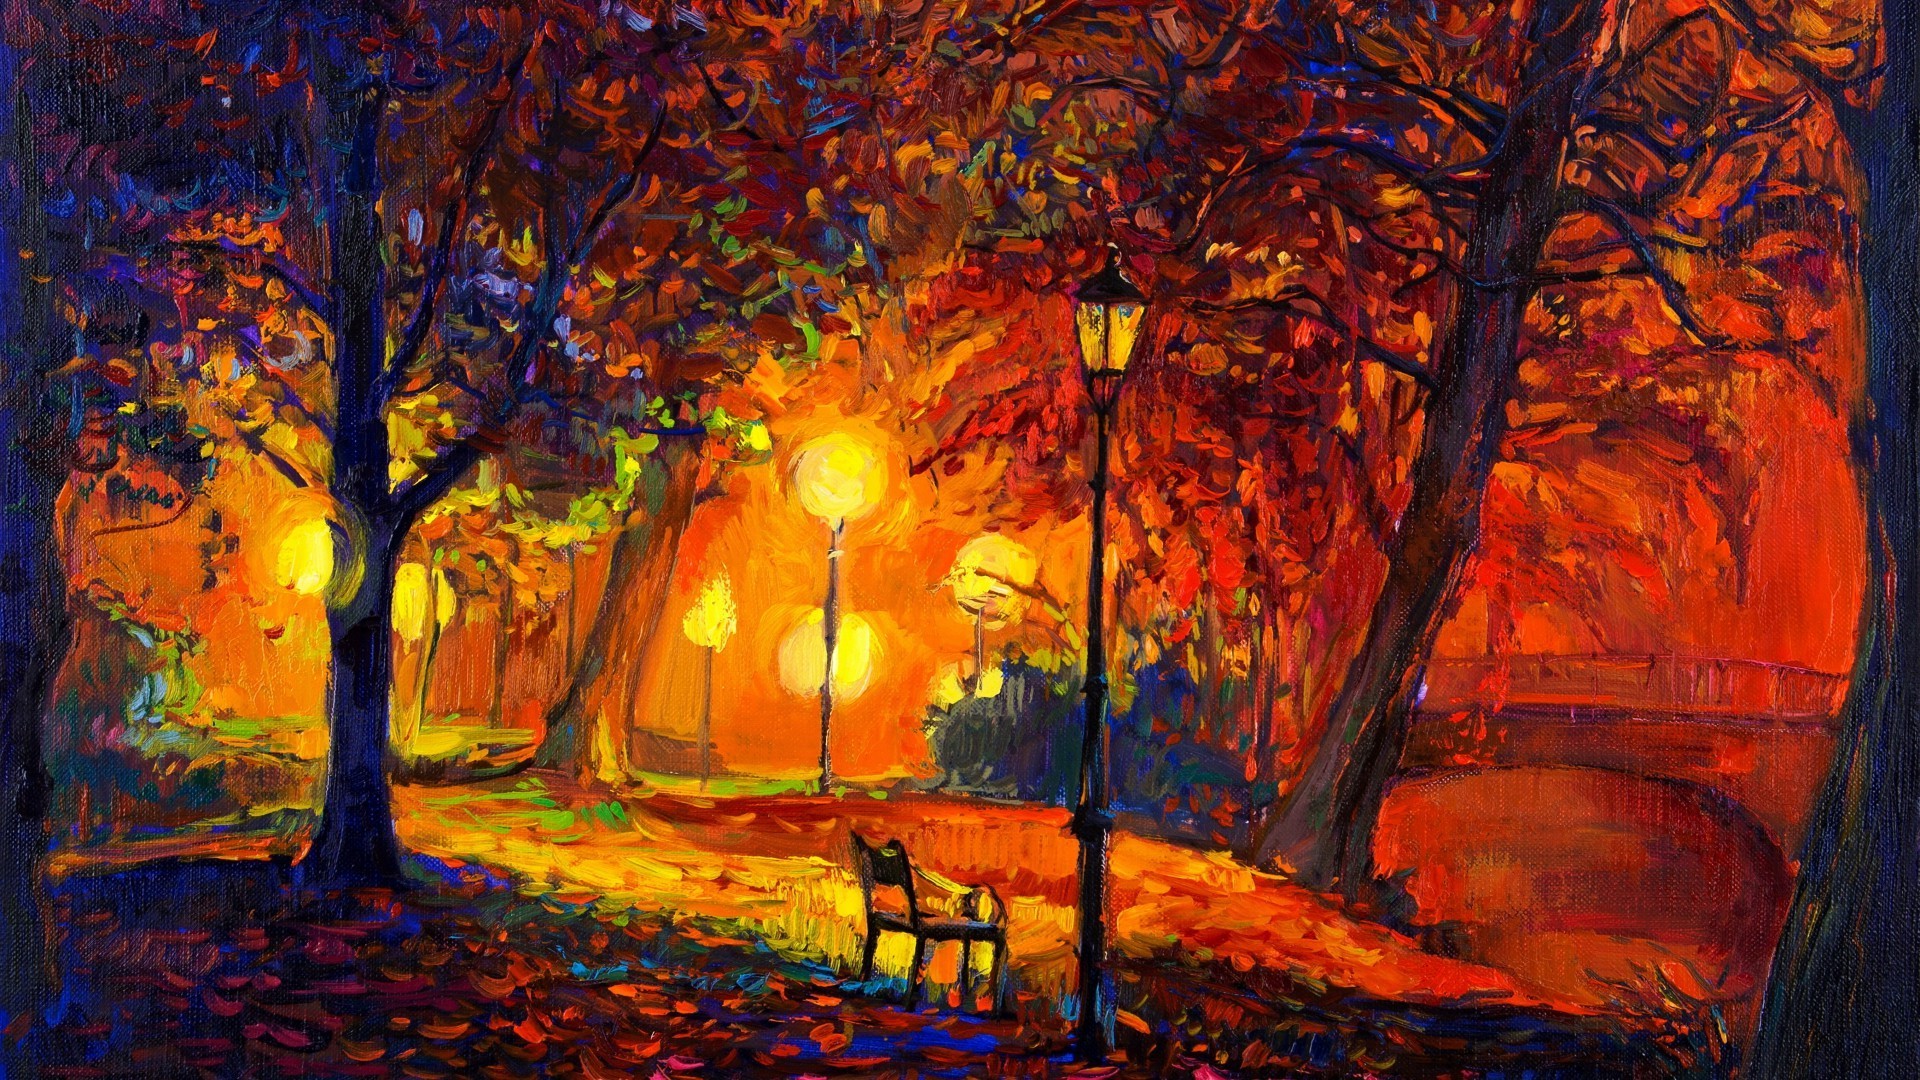 digital Art, Nature, Trees, Painting, Park, Bench, Lamps